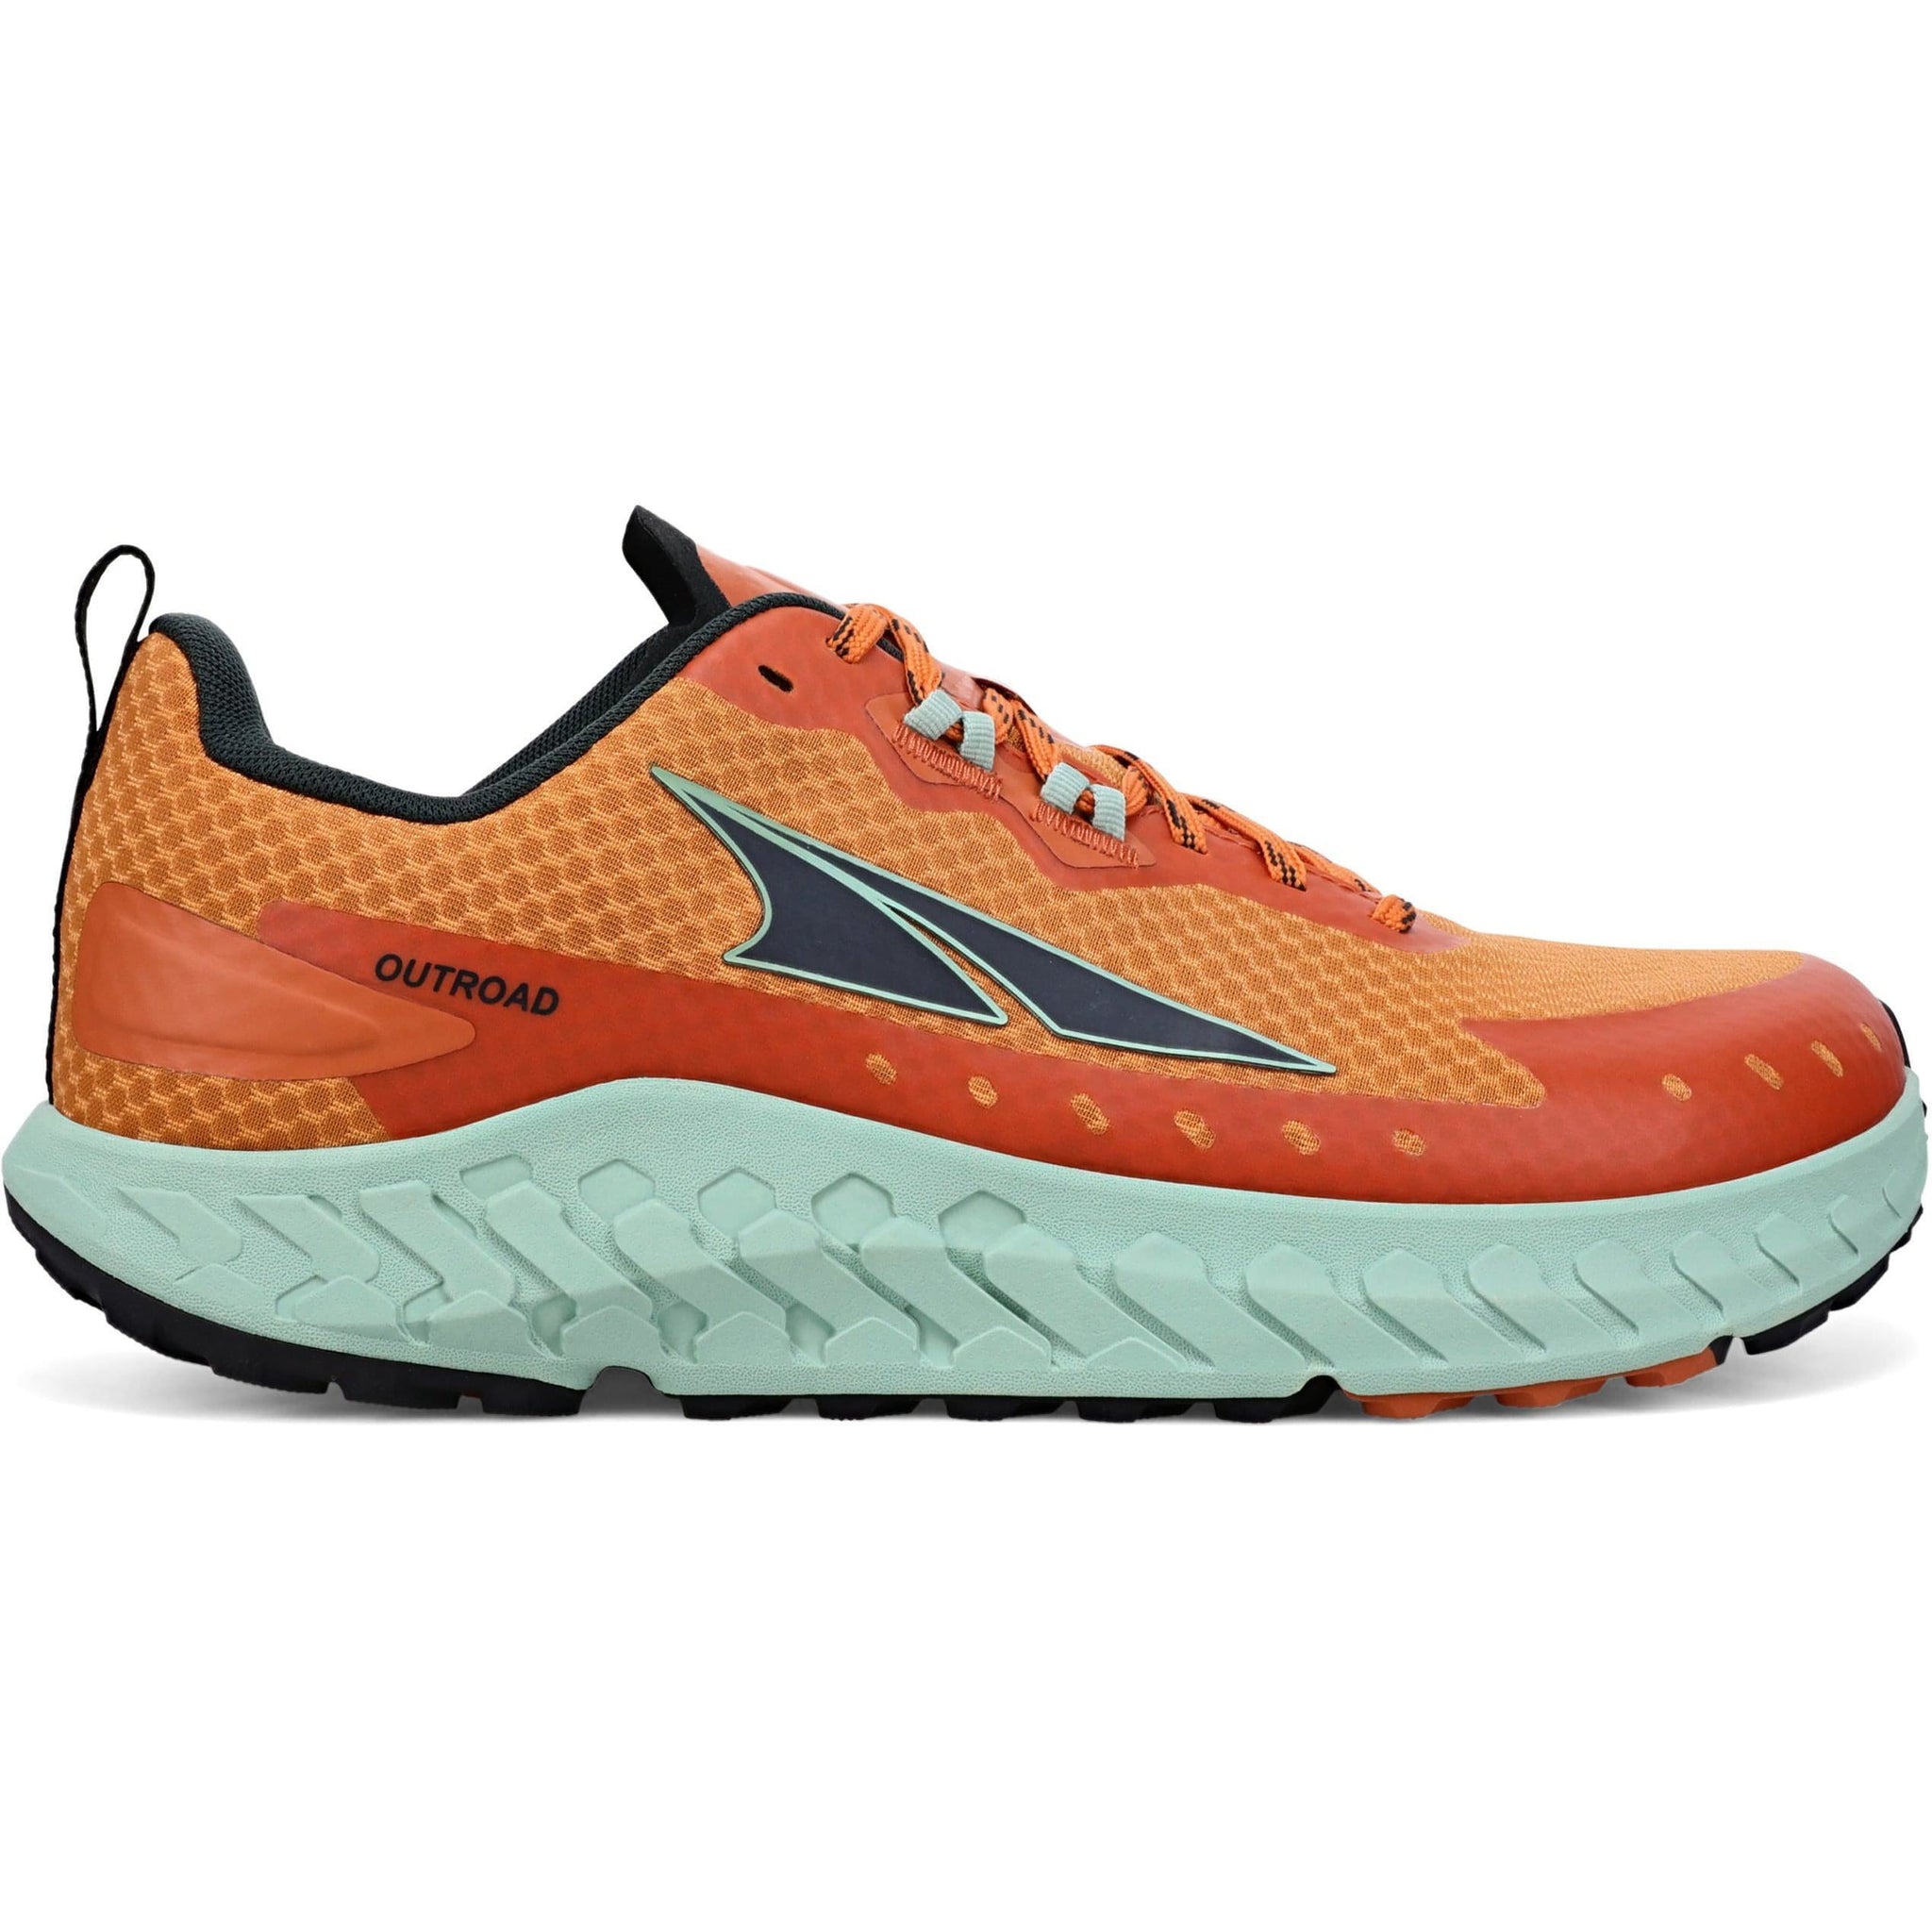 Altra Outroad Mens Trail Running Shoes - Orange